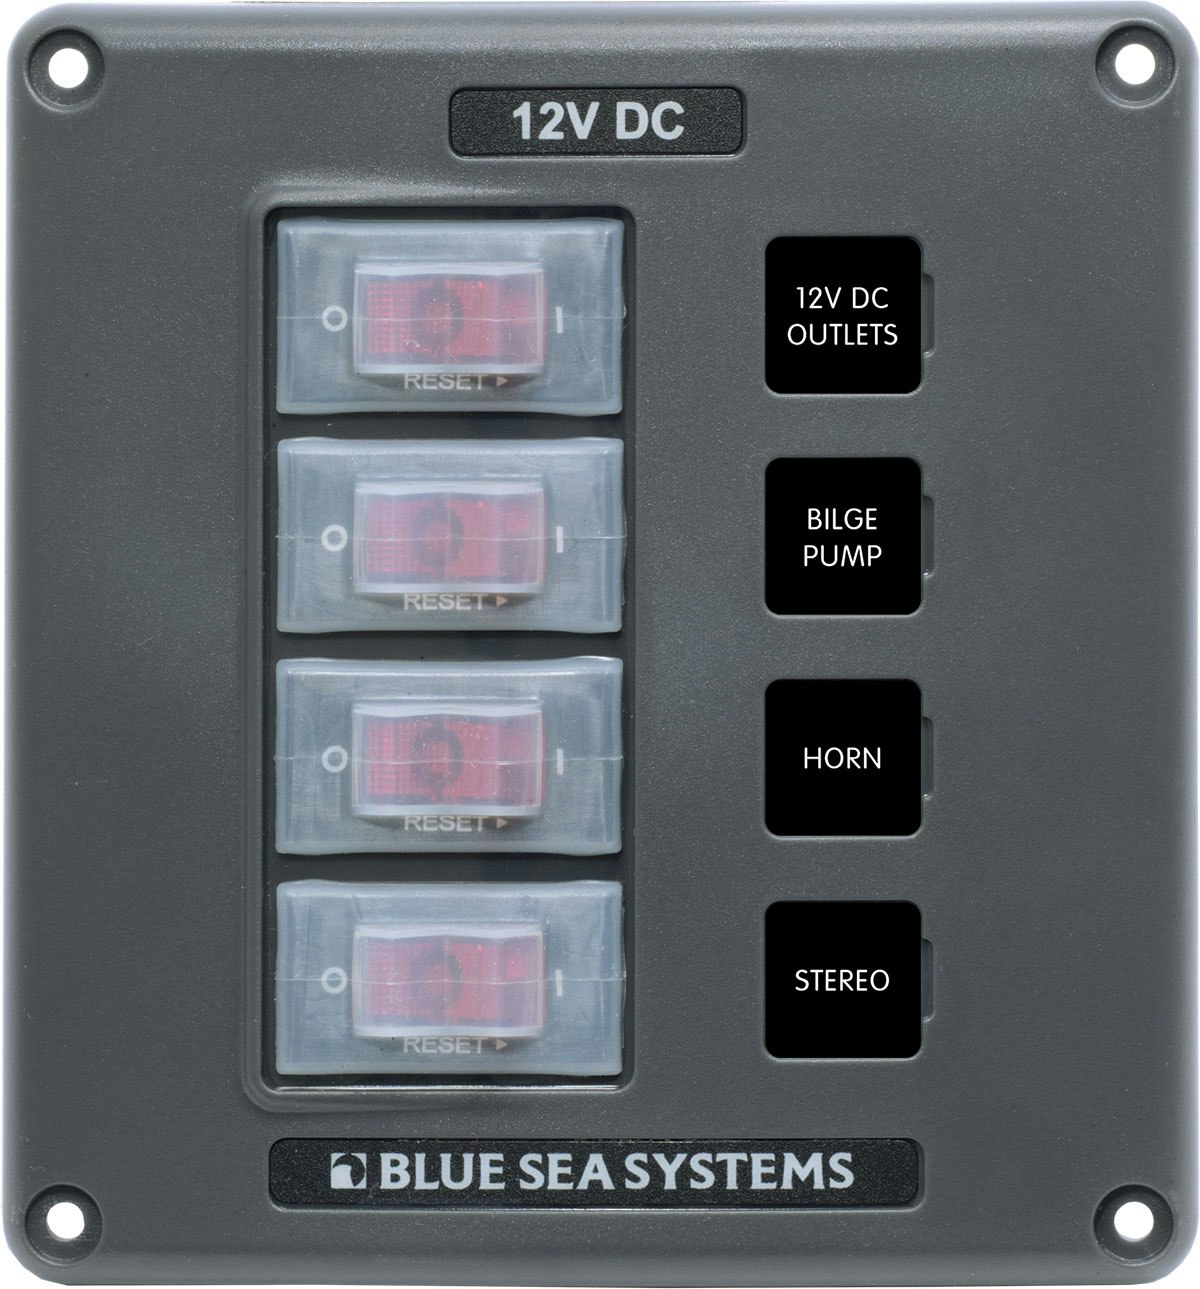  Blue Sea Systems - Waterproof Switch Panel - Grey, 4 Positions